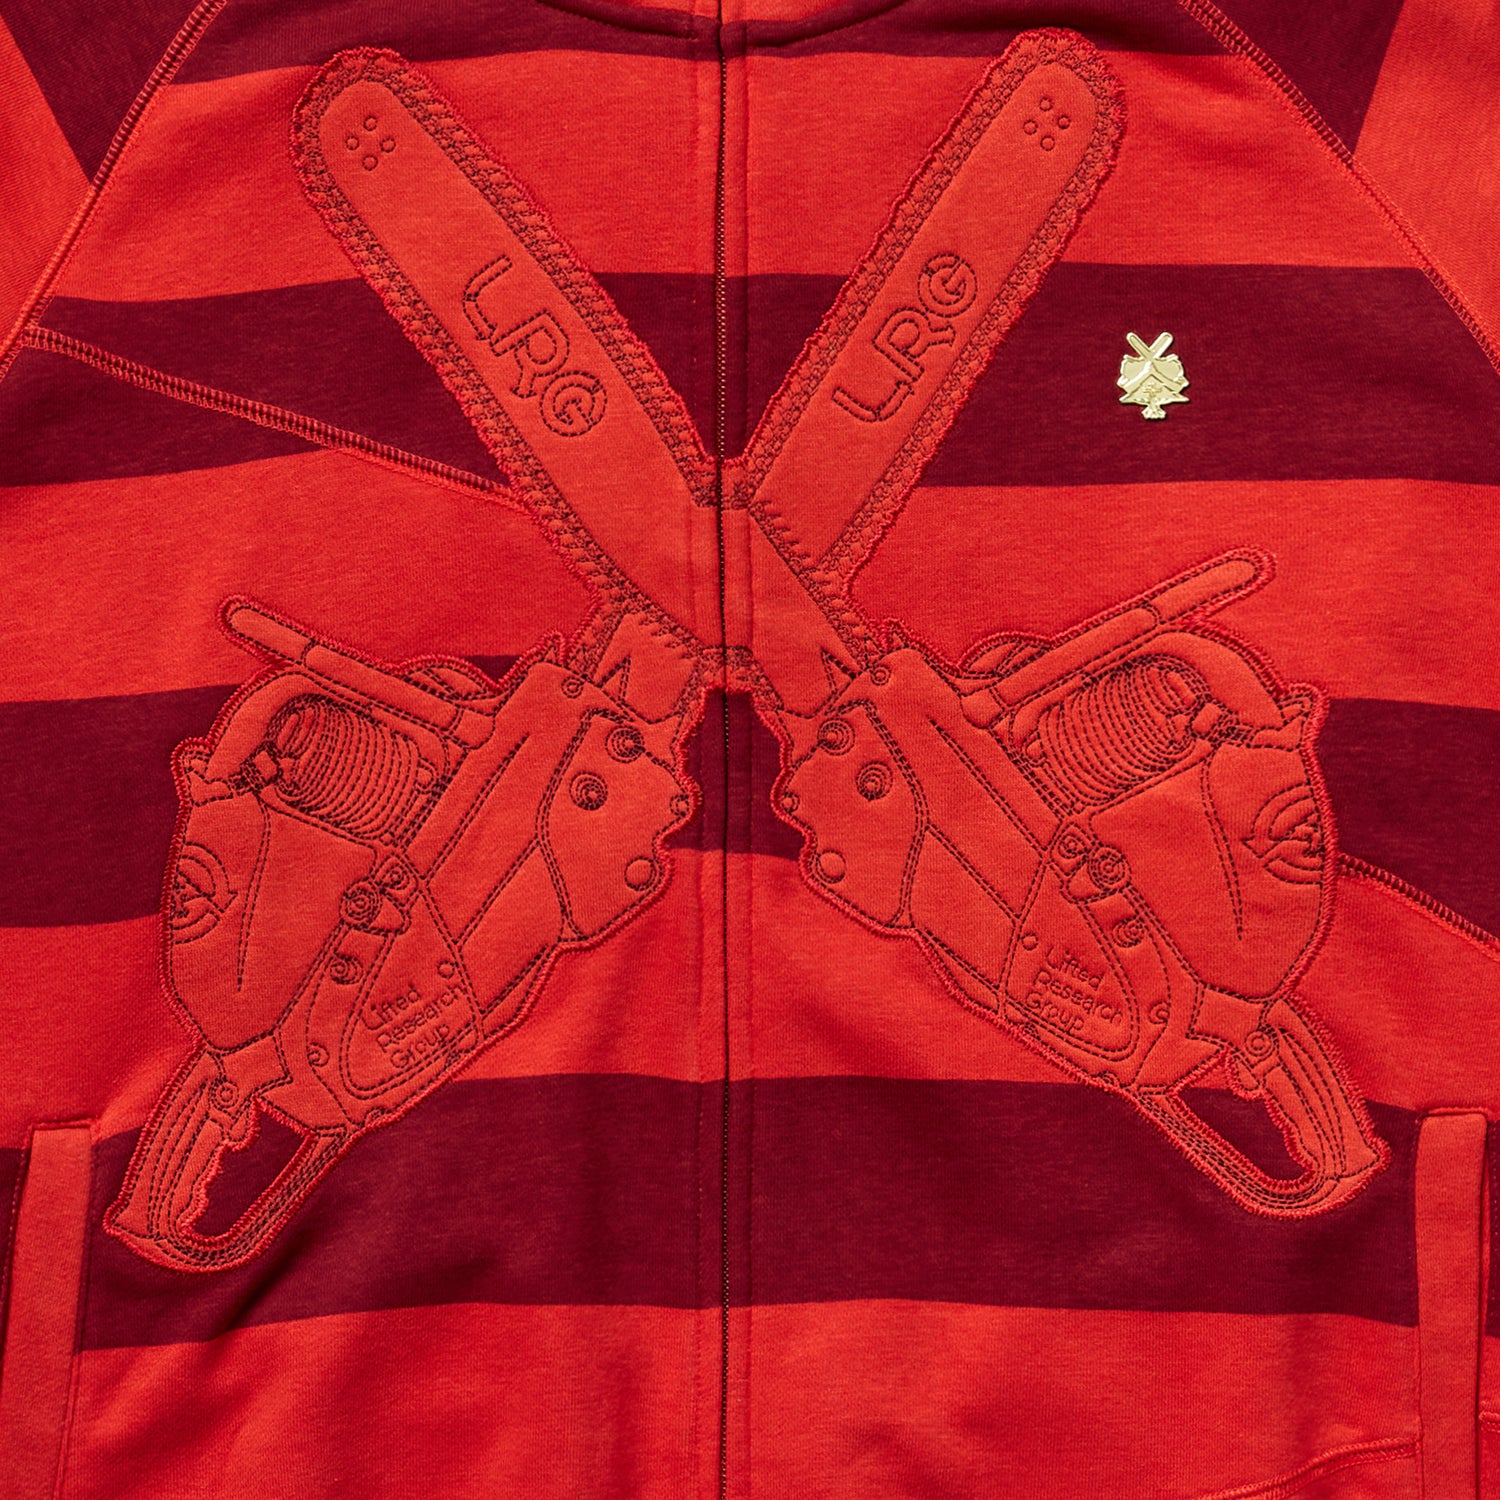 FRIDAY THE 47TH ZIP HOODIE - RED